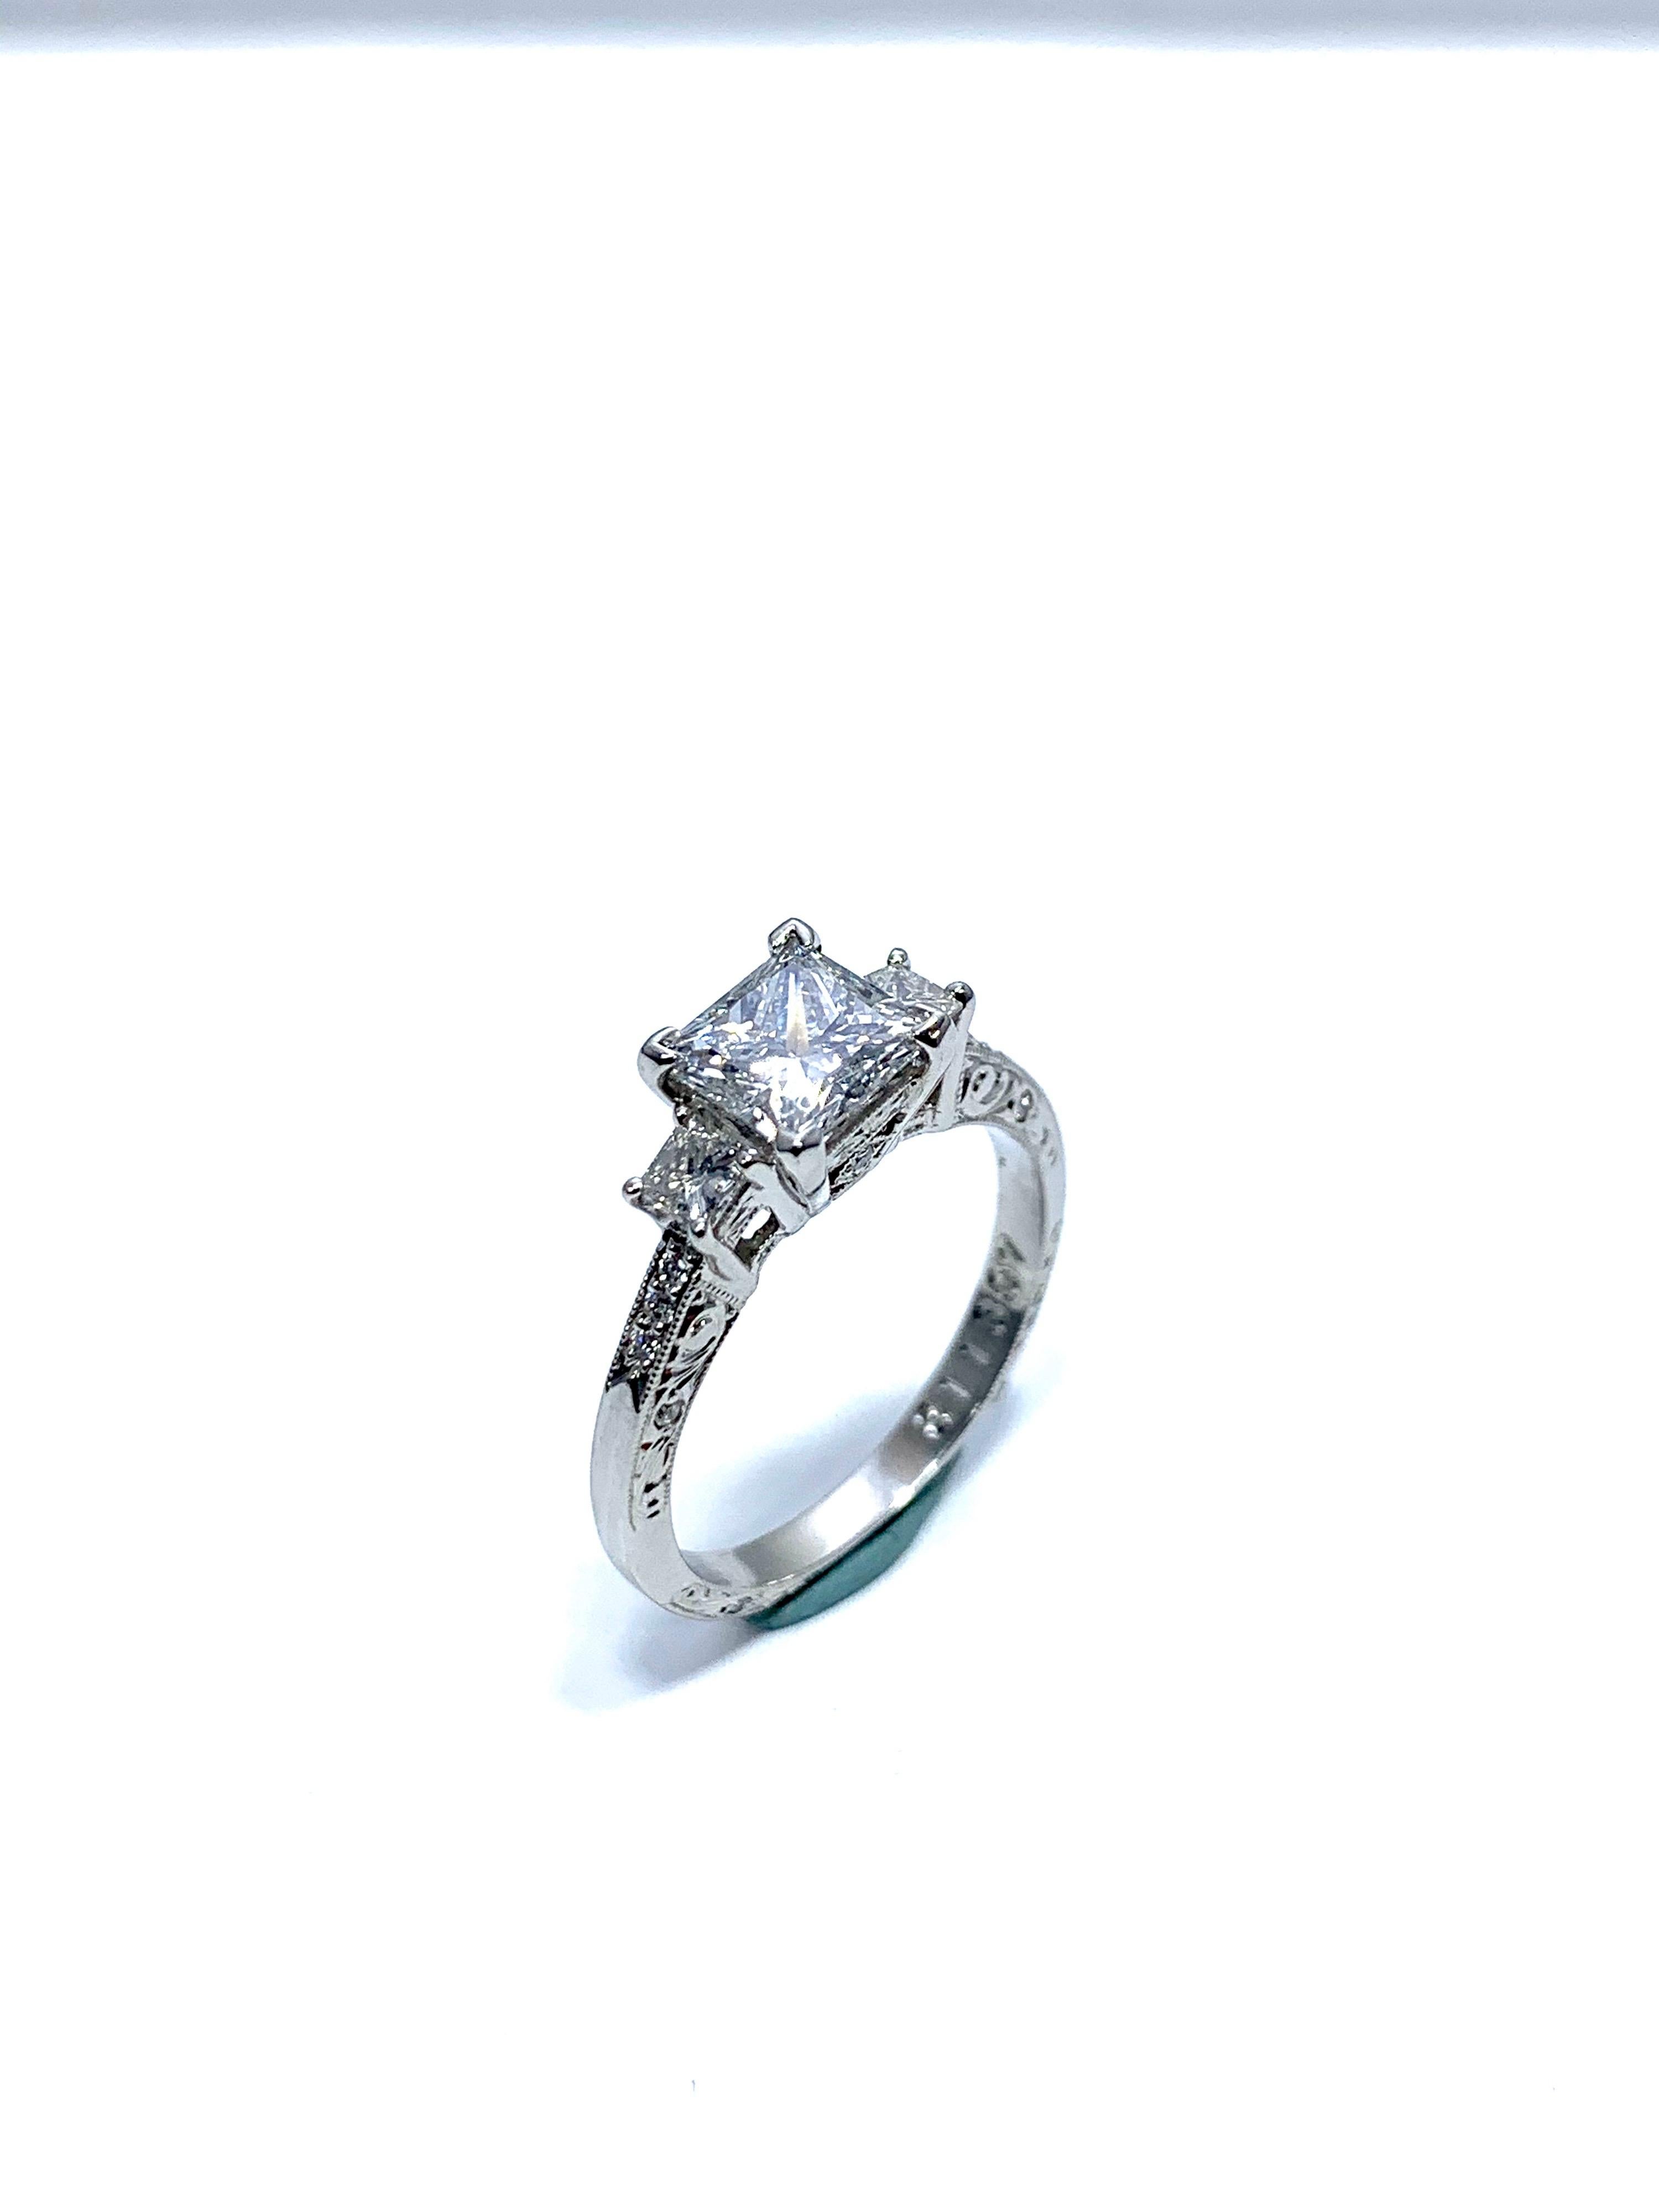 1.19 Carat Princess Cut Diamond and Handcrafted Platinum Engagement Ring For Sale 1